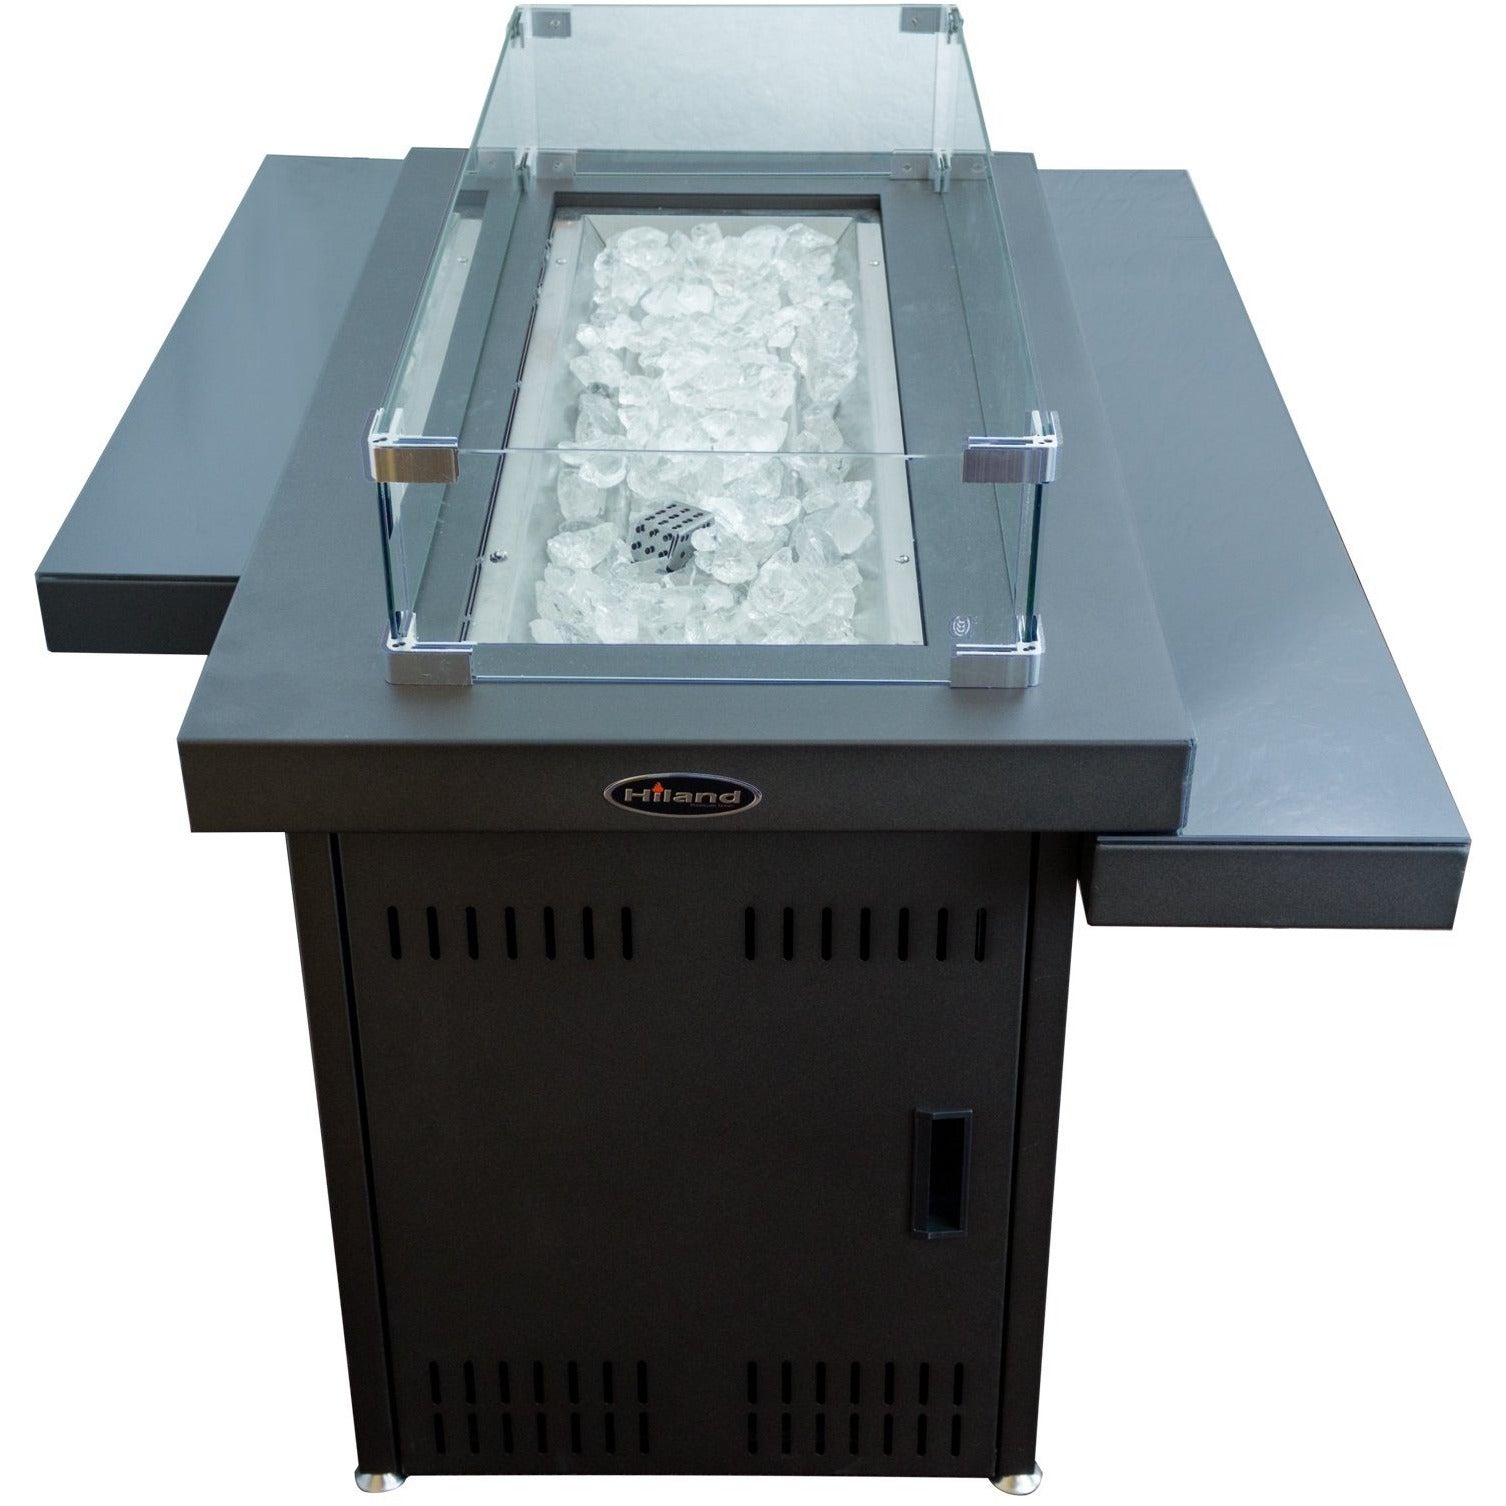 AZ Patio Heaters Two Tier Rectangular Glass Fire Pit Table - Sample product shot in white background